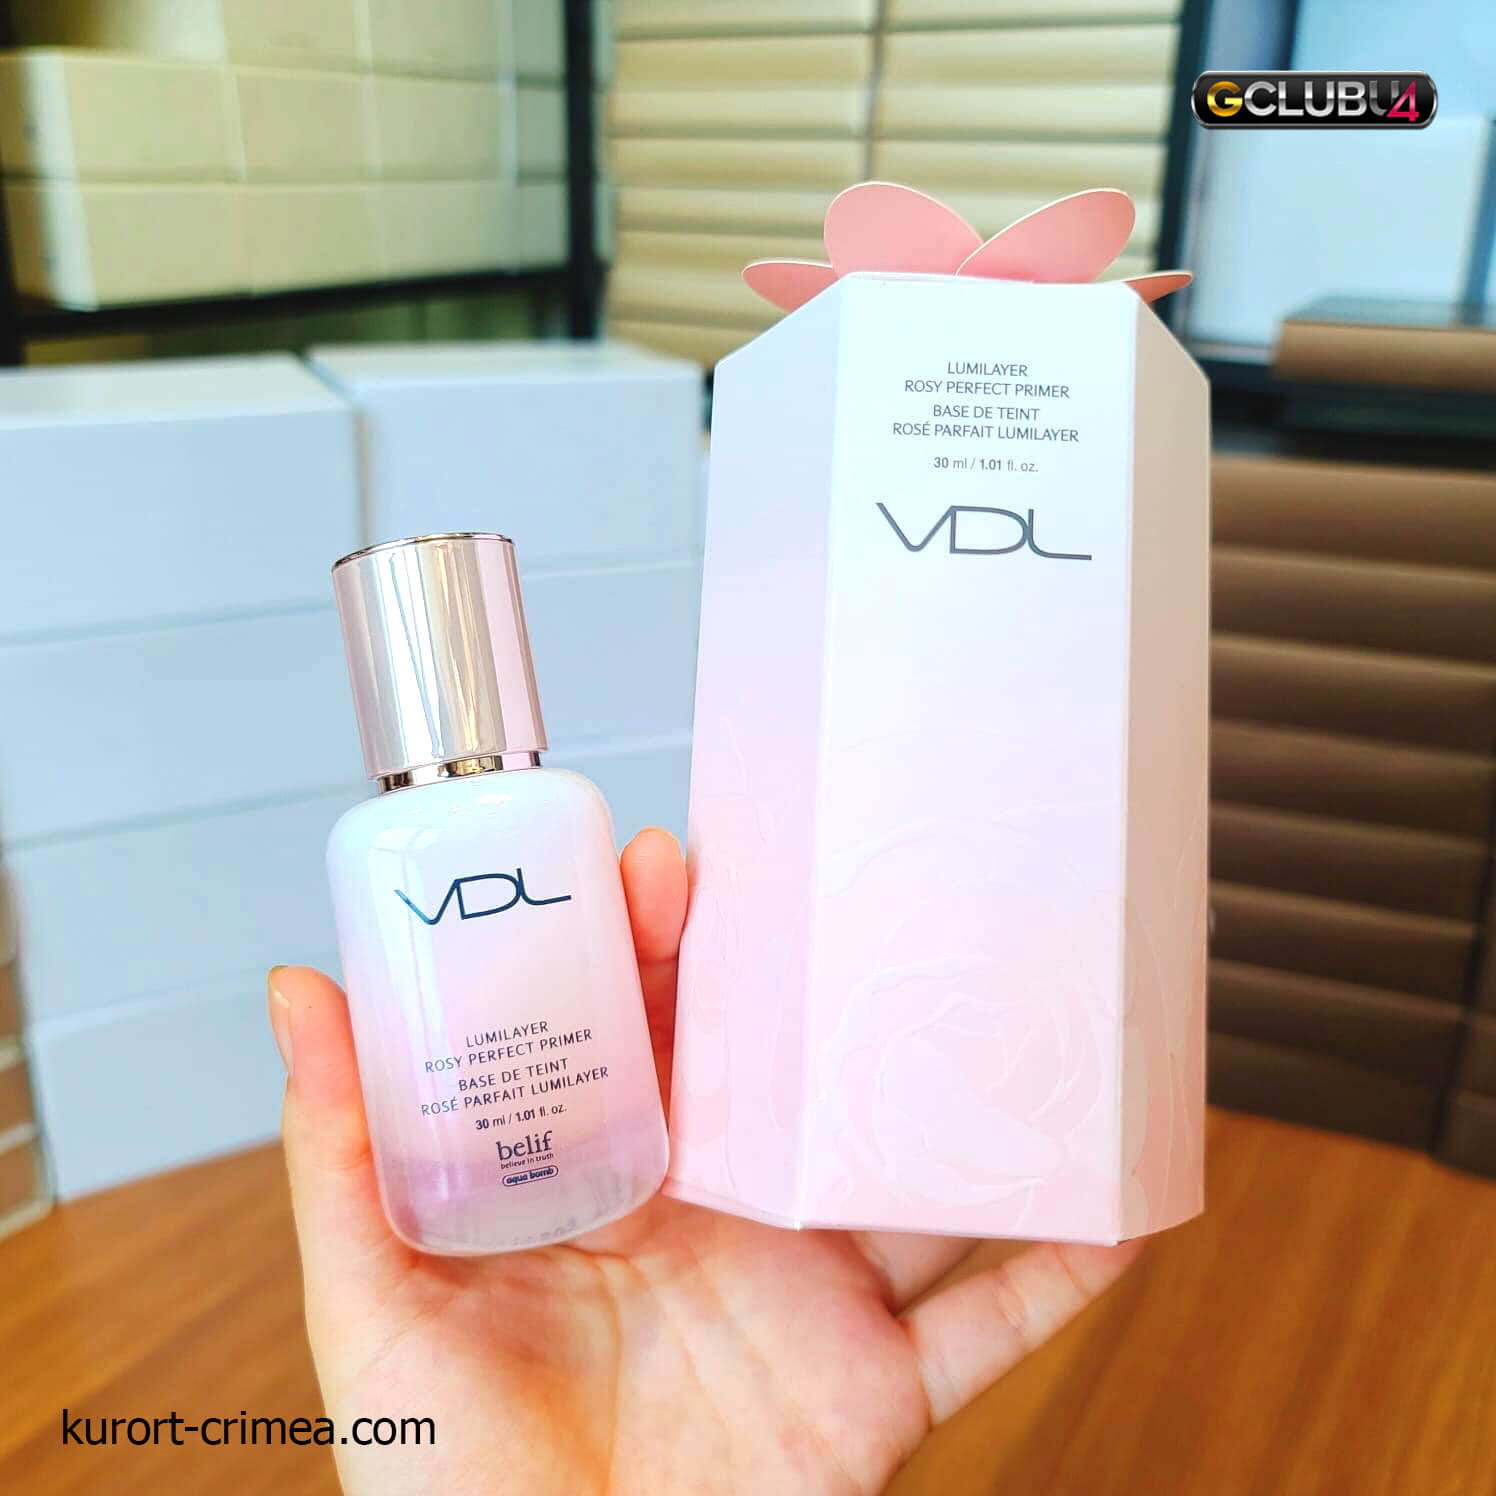 VDL | Lumilayer Rosy Perfect Primer